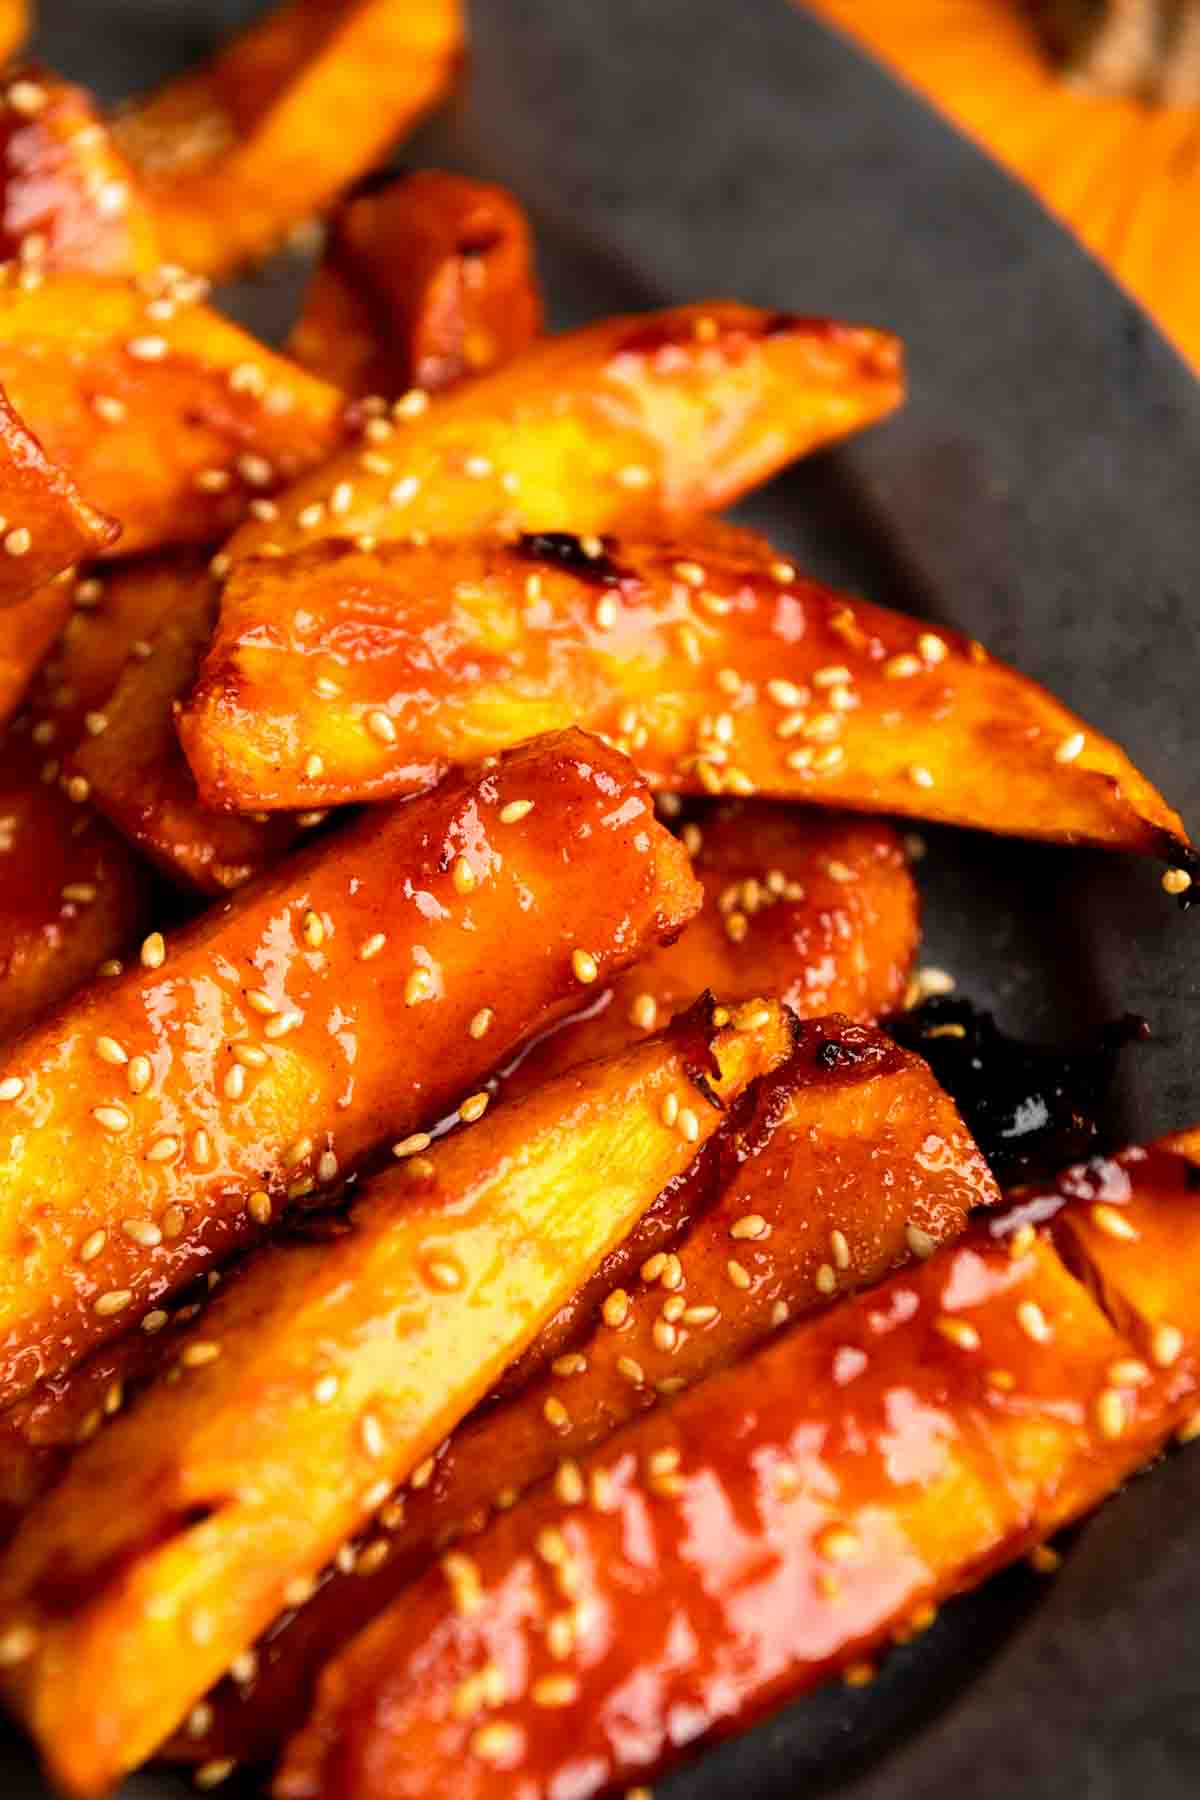 Shiny glazed wedges of pumpkin with gochujang and maple.